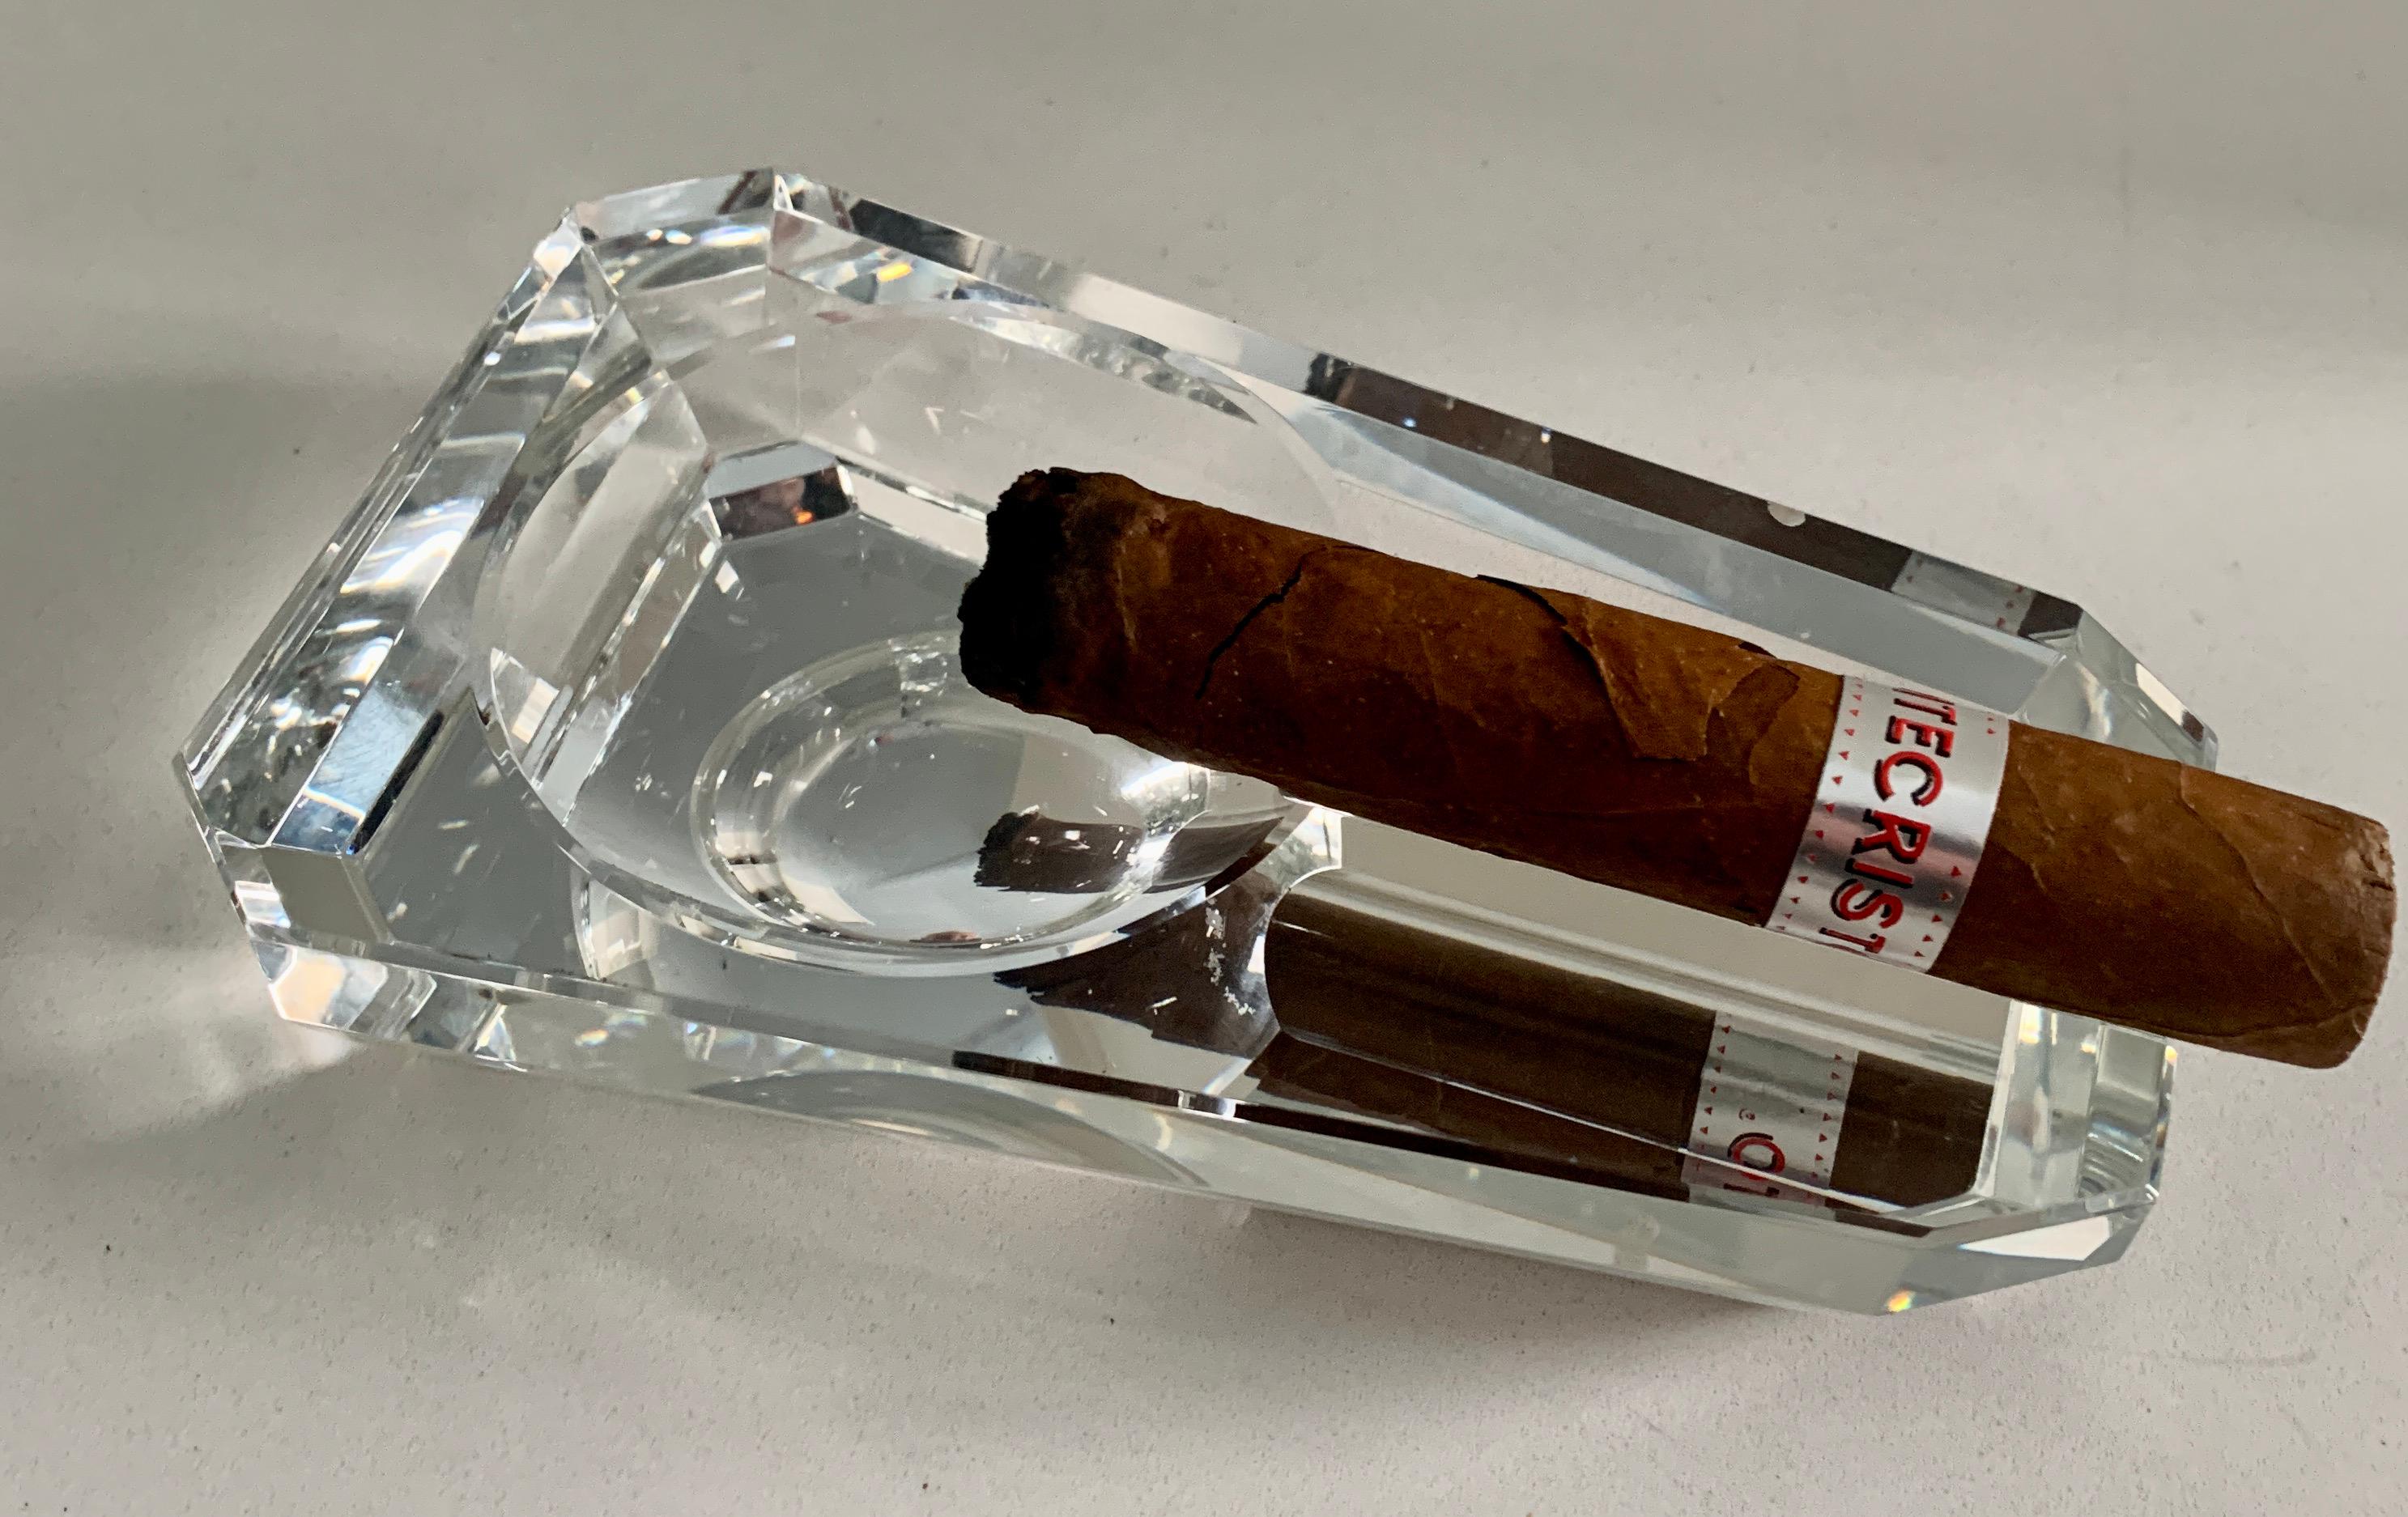 A wonderful cigar ashtray of Cut Crystal - a stunning piece with the truest quality of crystal - a very faceted piece. A compliment any bar, desk or work station, or wine area of your home or office... great for 420 as well. A sleek and very